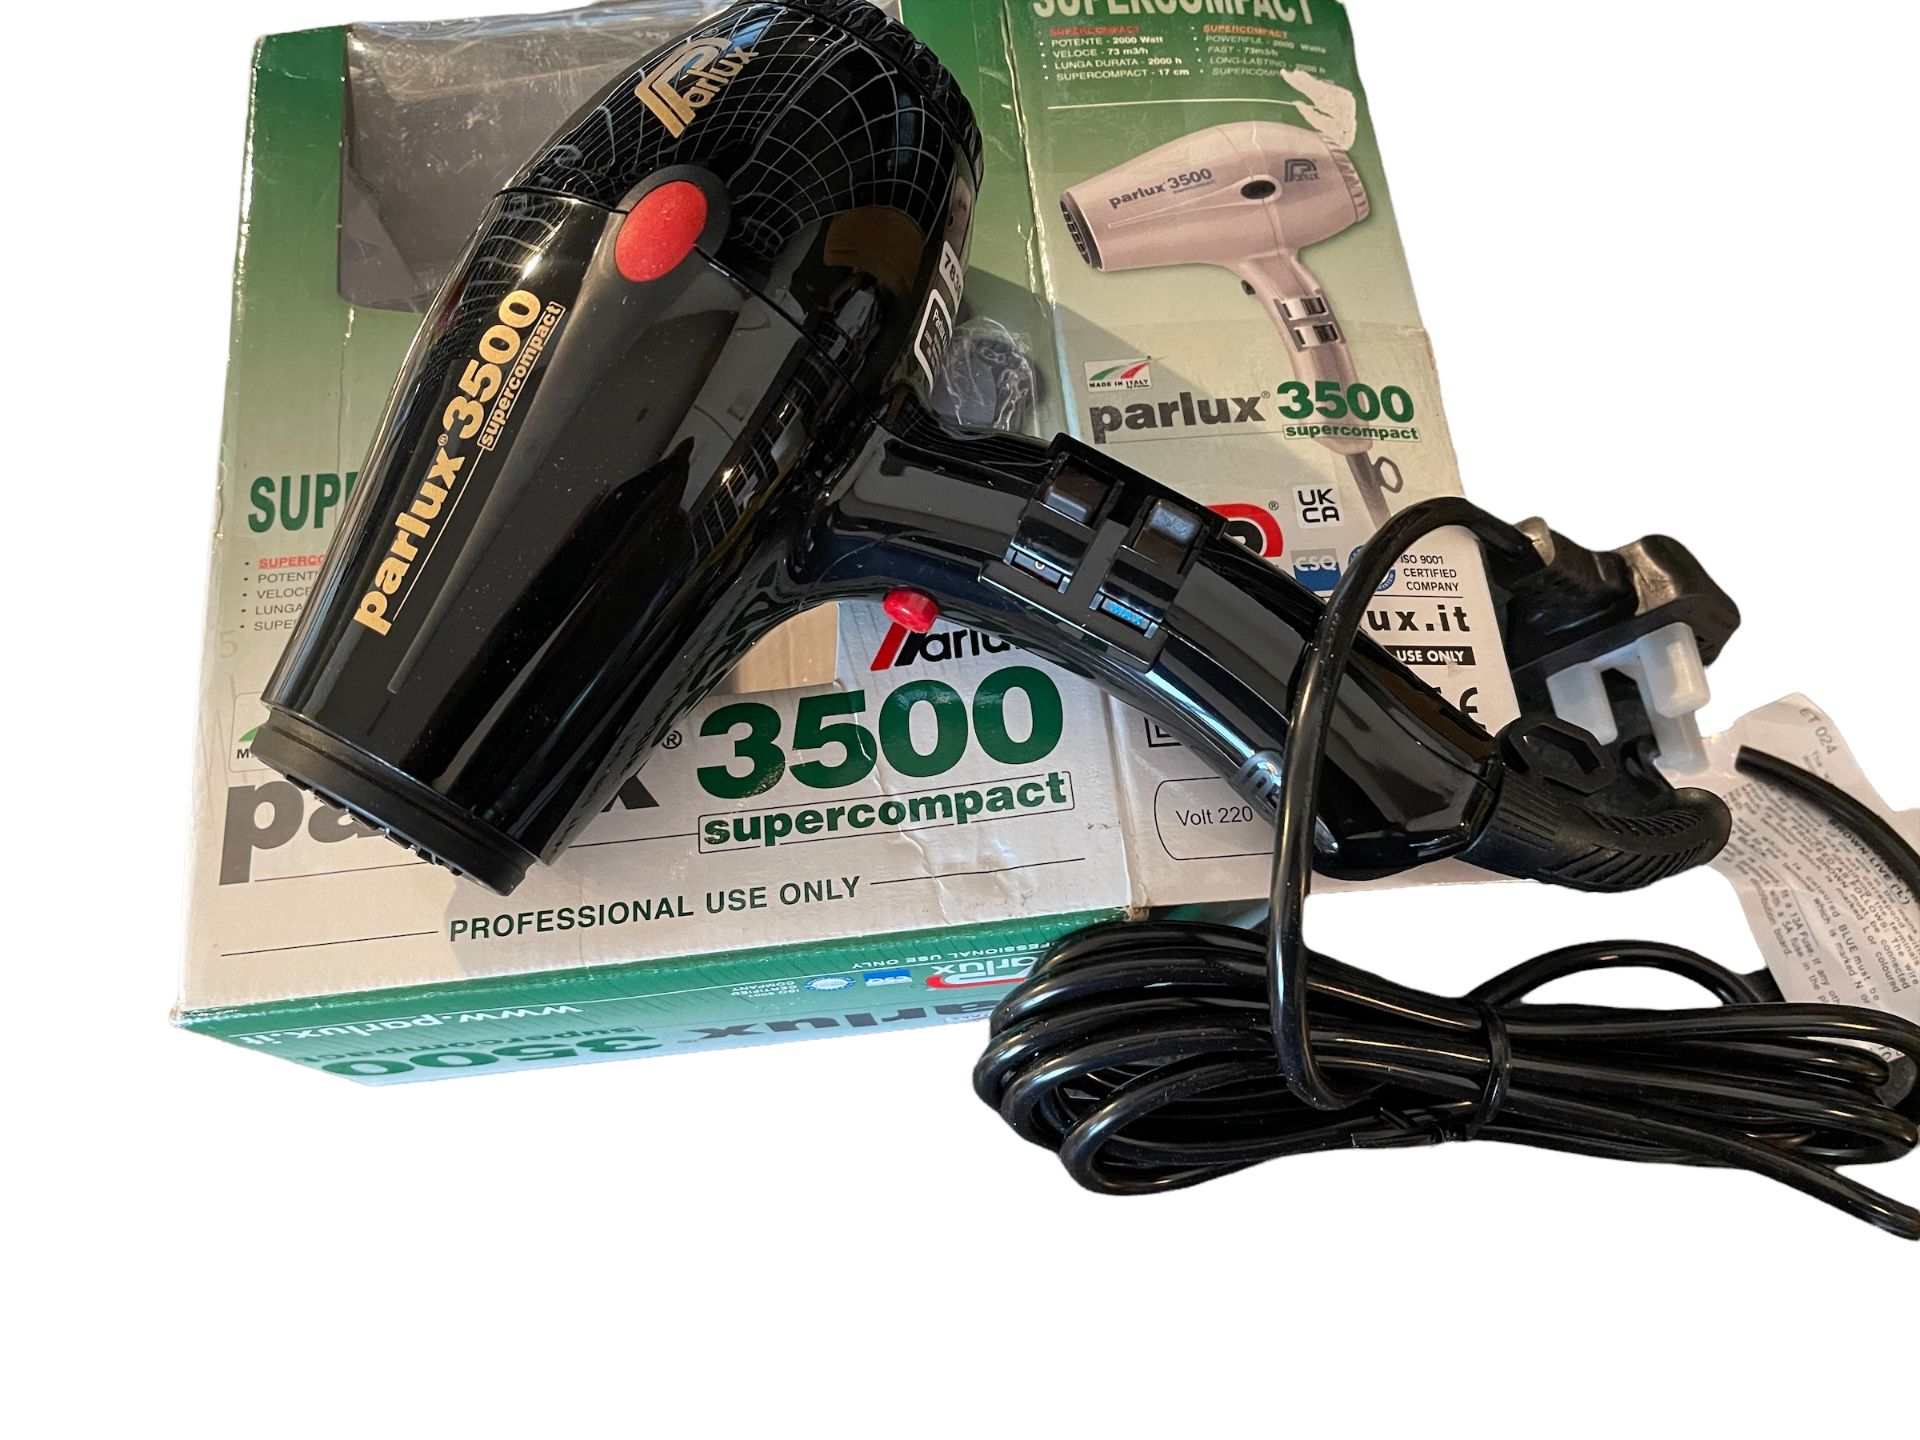 Parlux 3500 Supercompact Professional Hairdryer RRP £249 - Ex Demo or Surplus Stock from Private... - Image 11 of 11